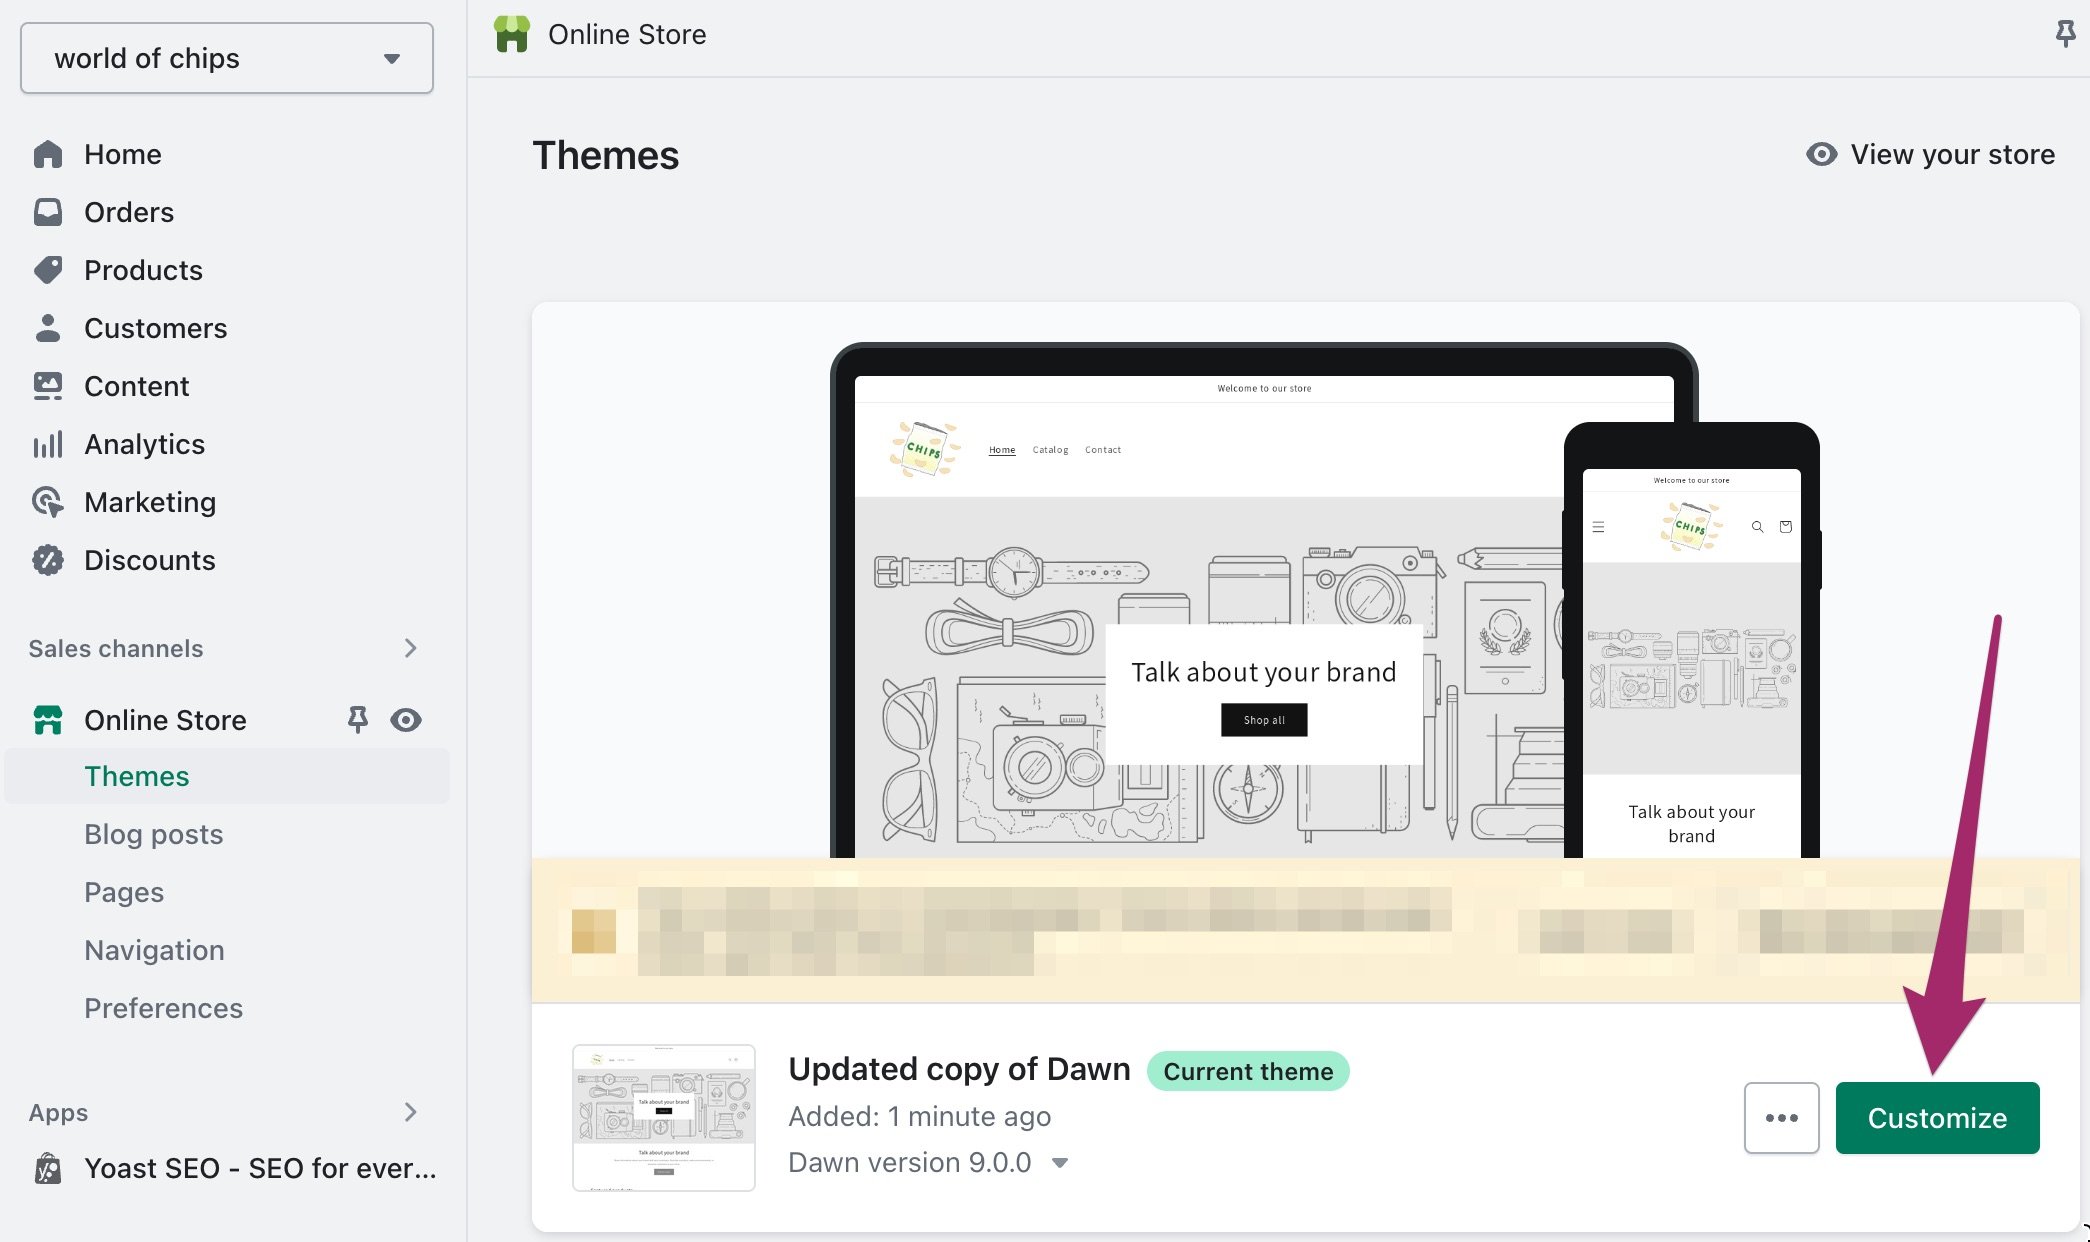 screenshot of the Shopify admin highlighting the Customize button on the Online Store > Themes page